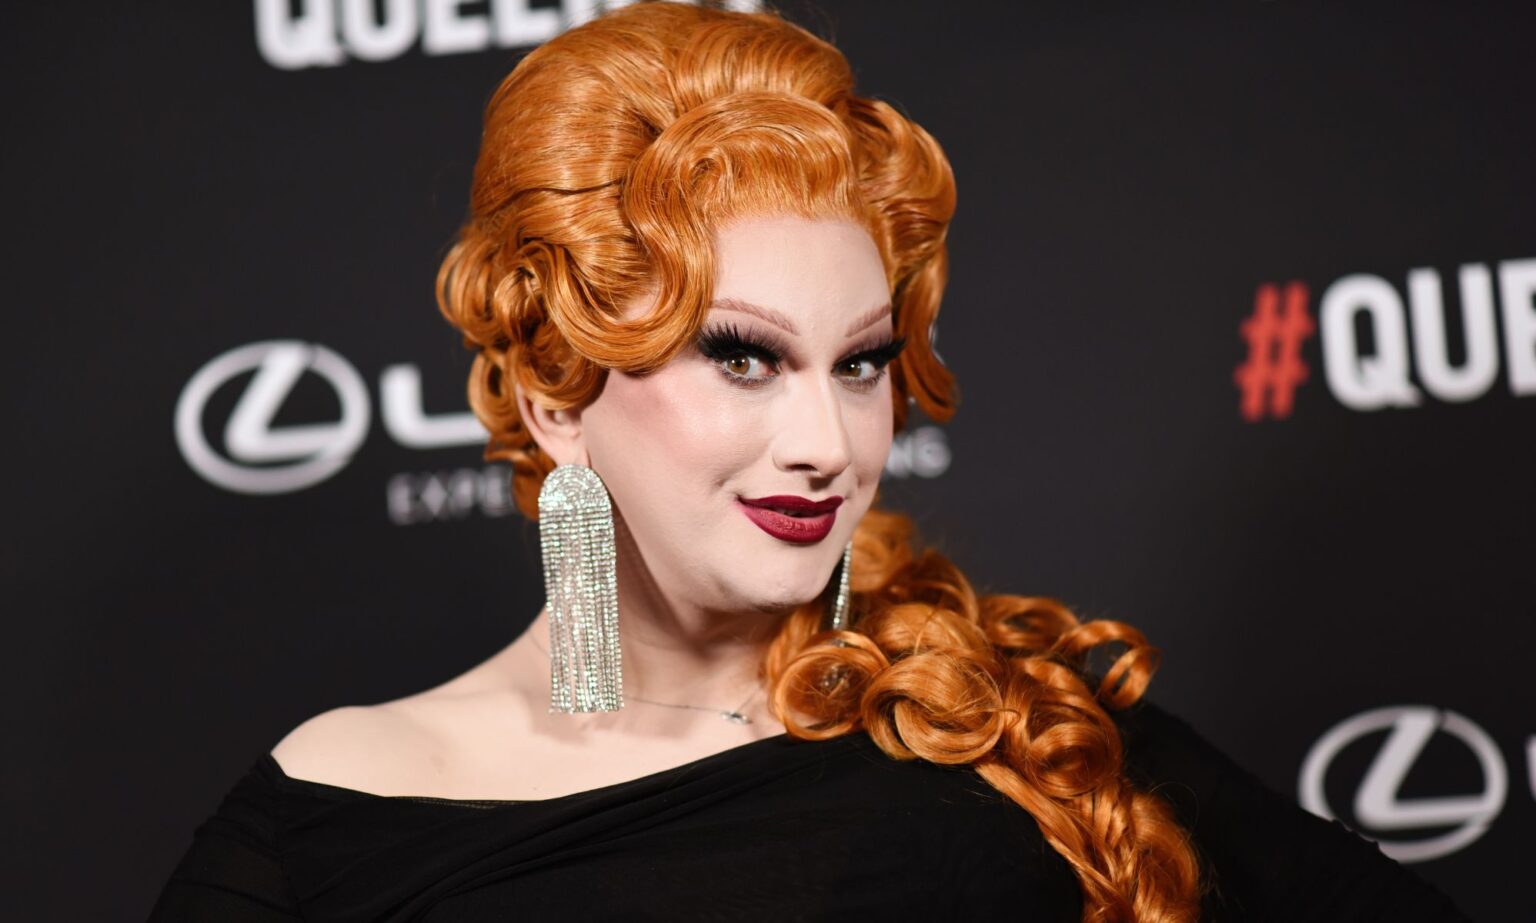 Jinkx Monsoon empowered as trans actor.